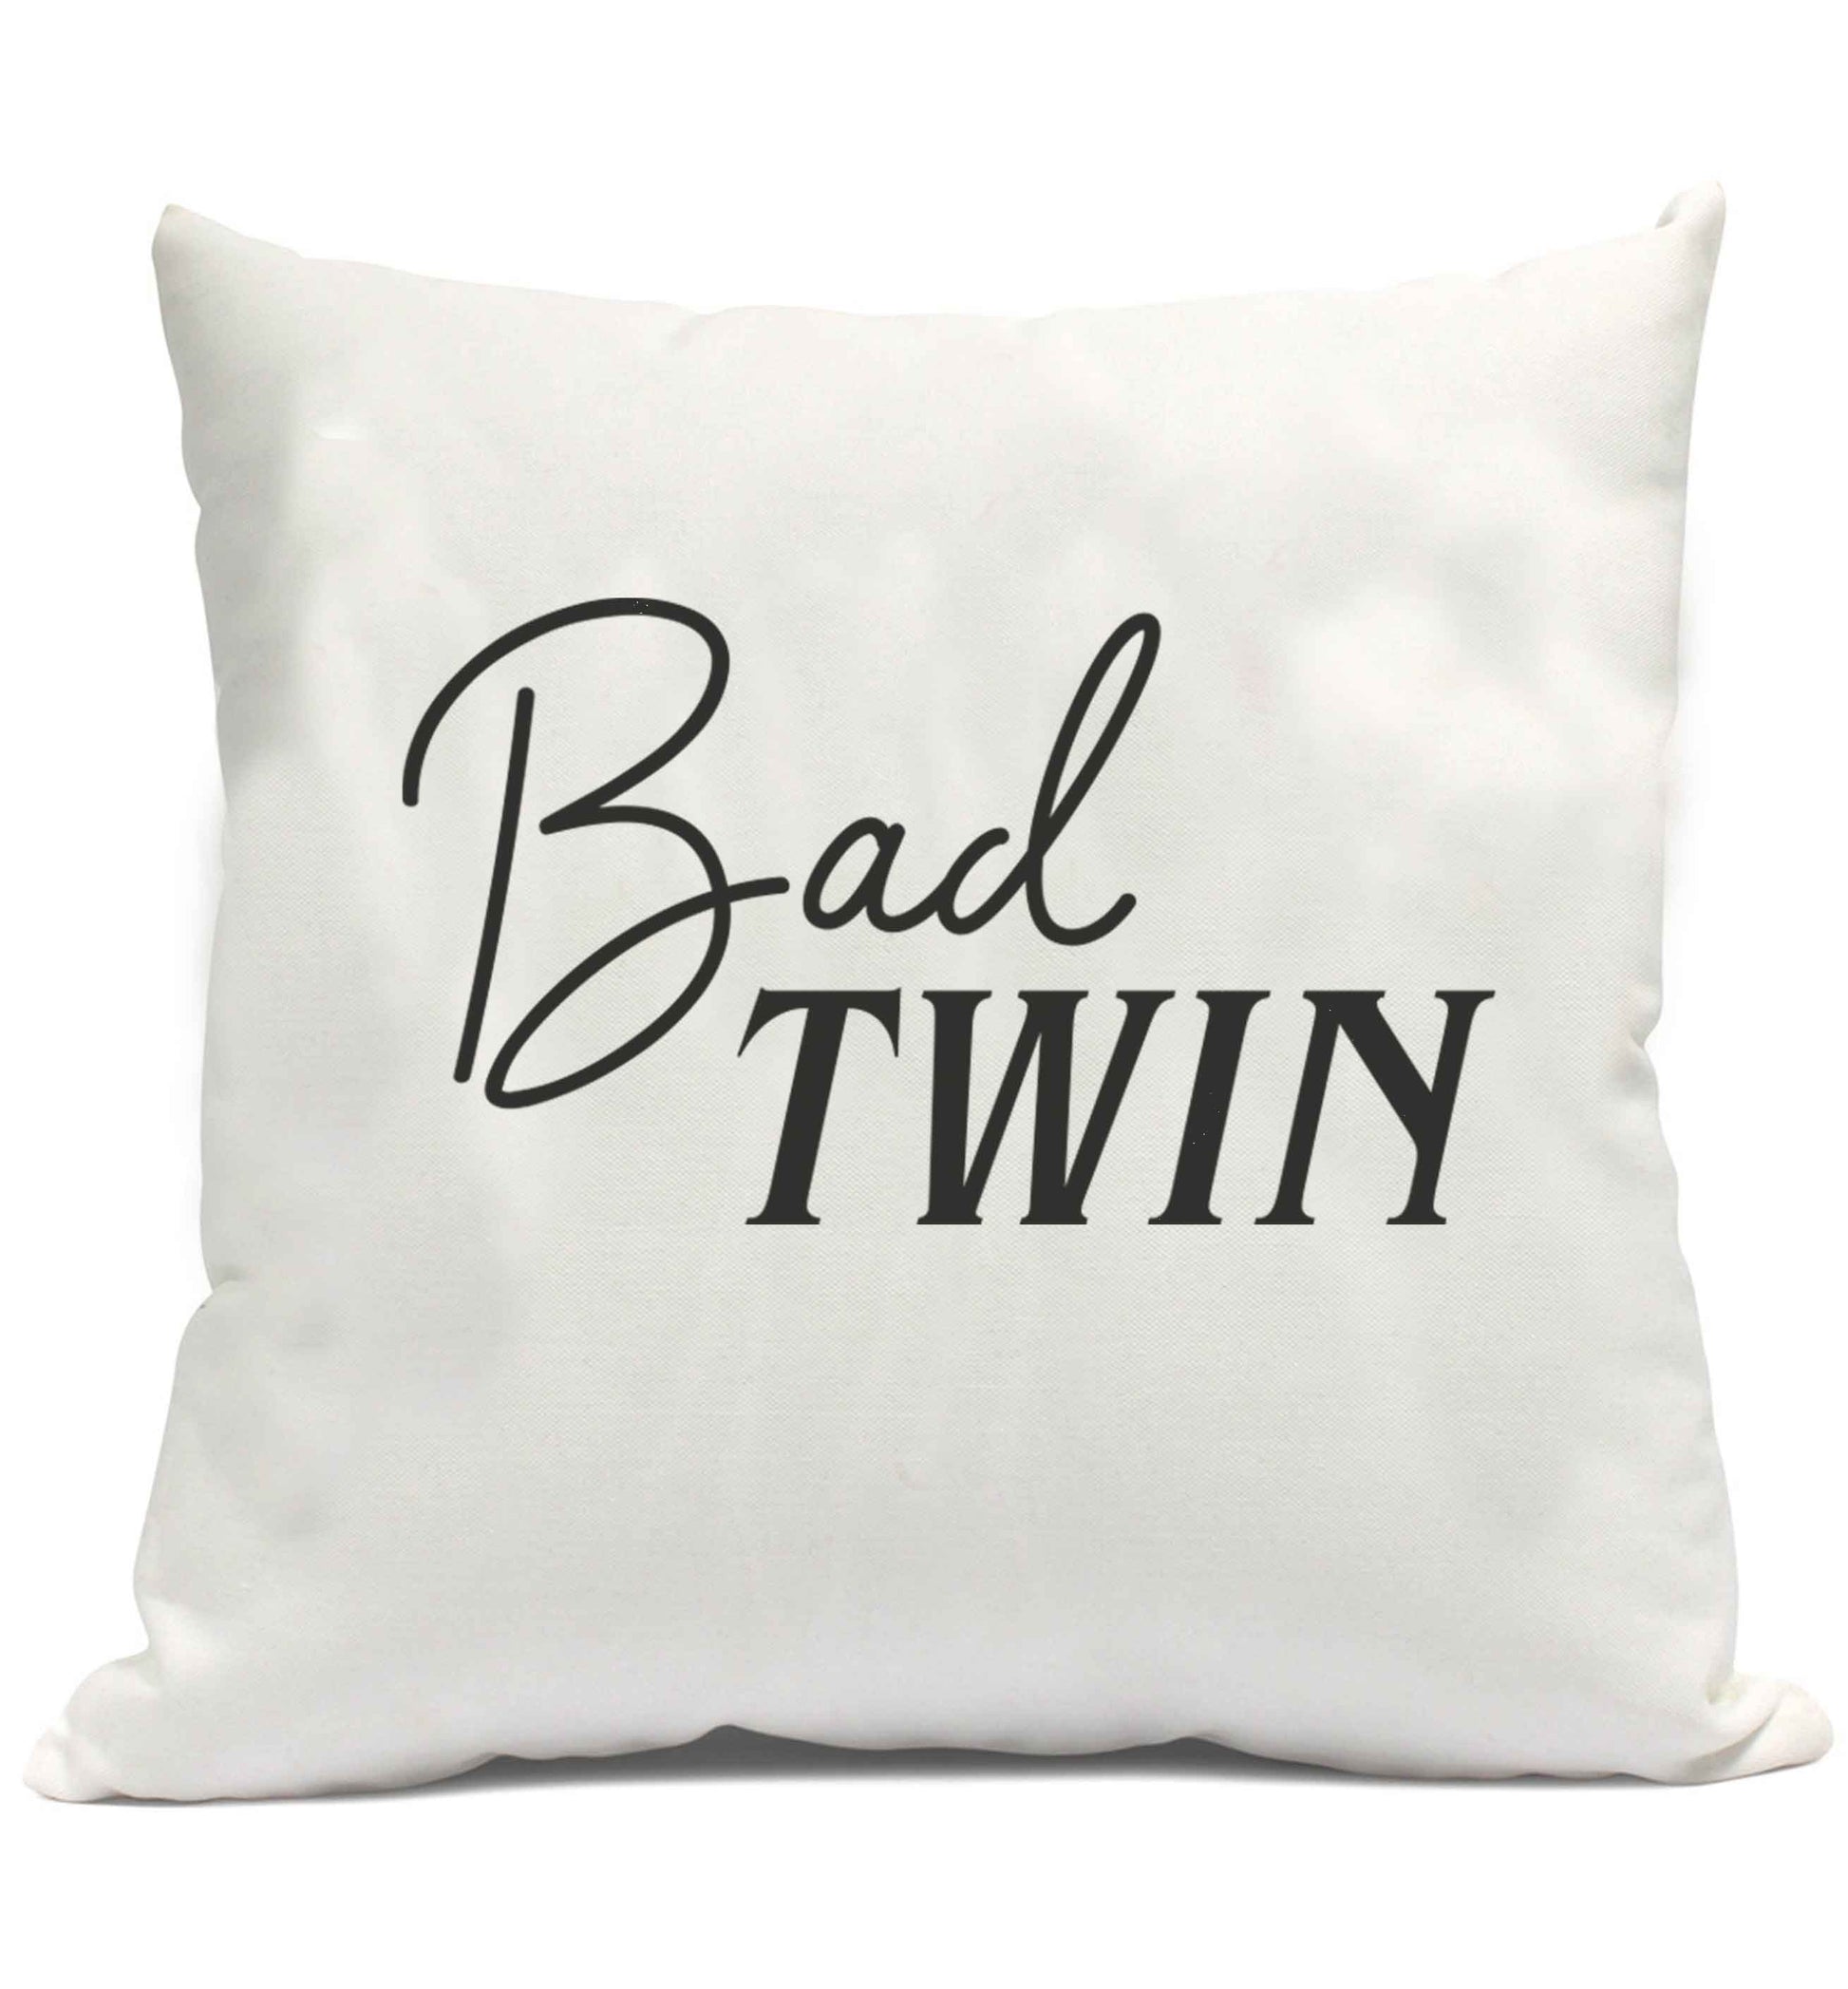 Bad twin cushion cover and filling